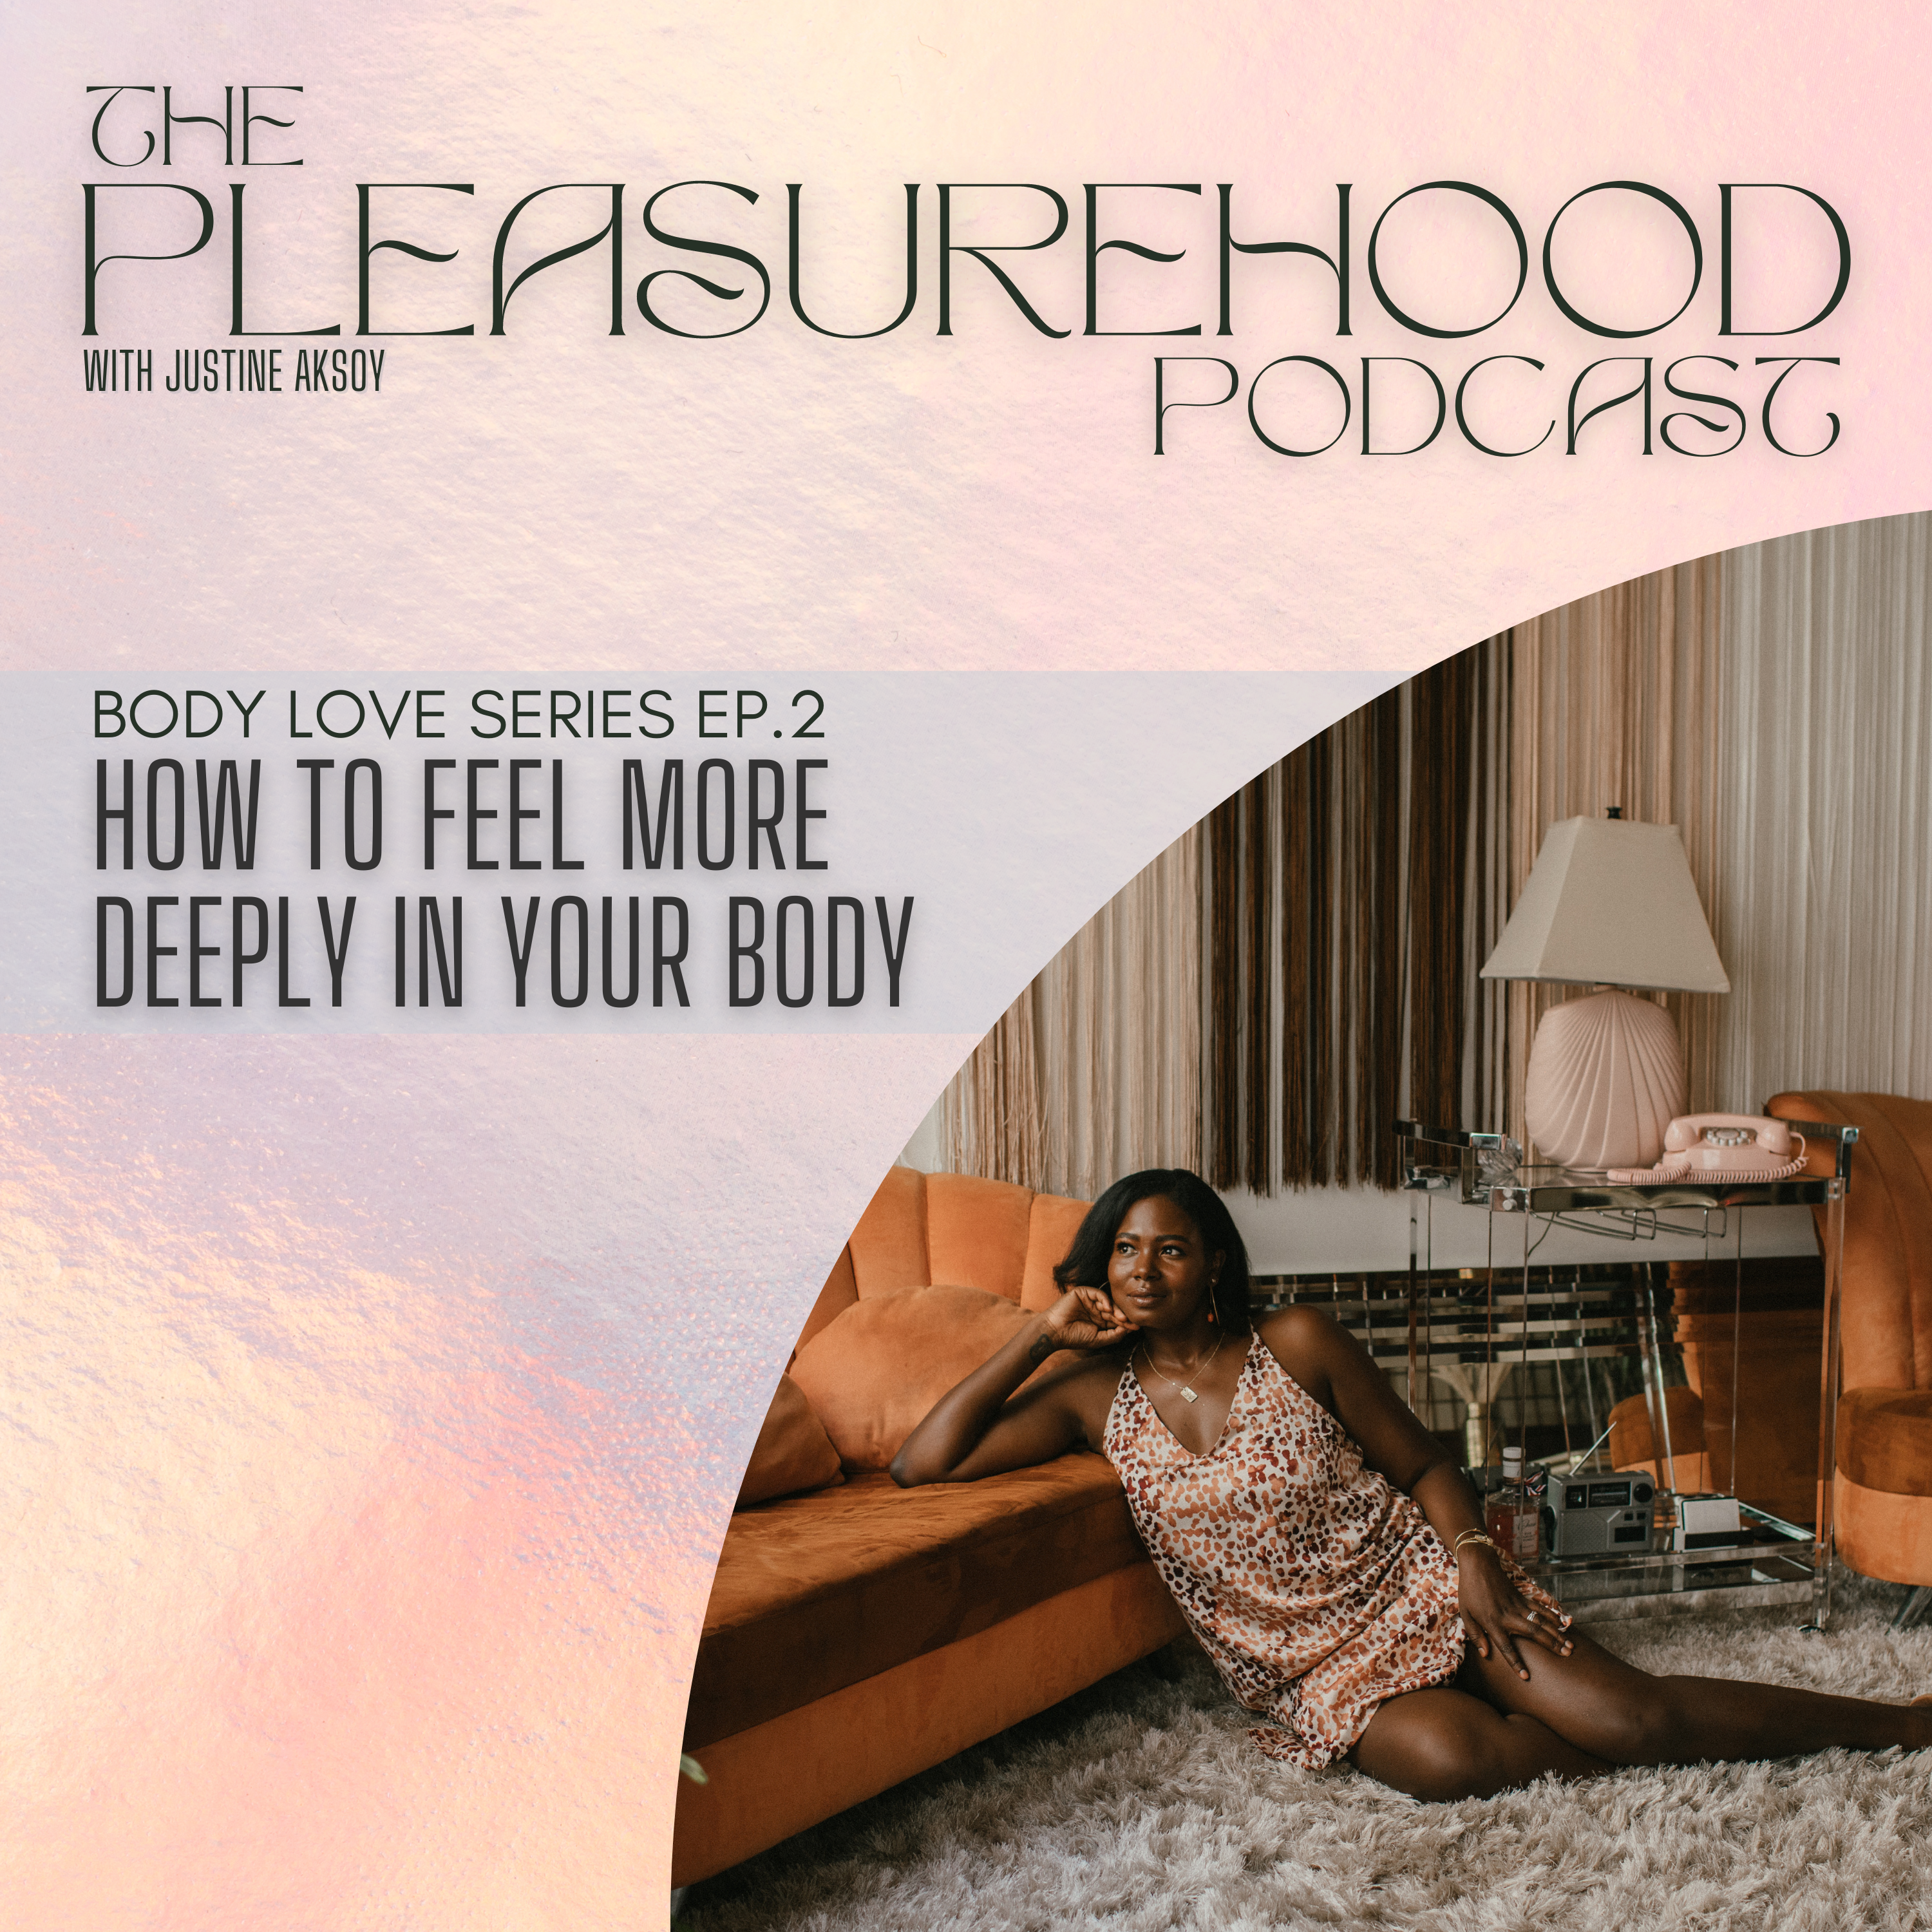 Body Love Series Episode 2: How to Feel More Deeply in Your Body